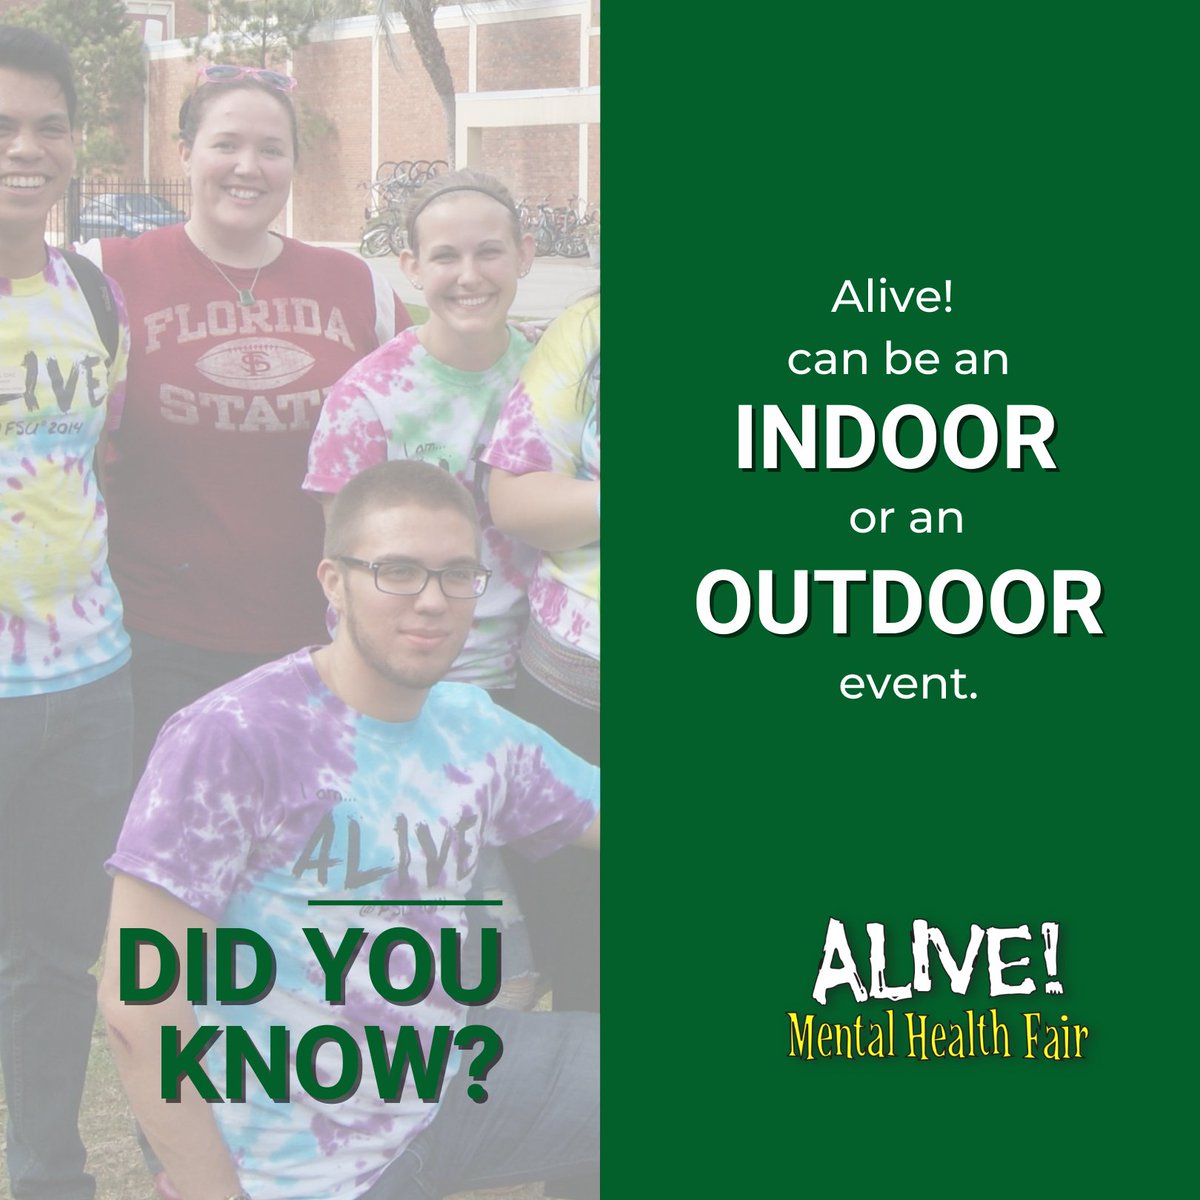 Winter indoor event or spring outdoor event? #AliveMentalHealthFair can be both! What kind of event is your campus looking for? 
#CampusActivities #SuicidePrevention #MentalHealthEvent #WellnessWeek